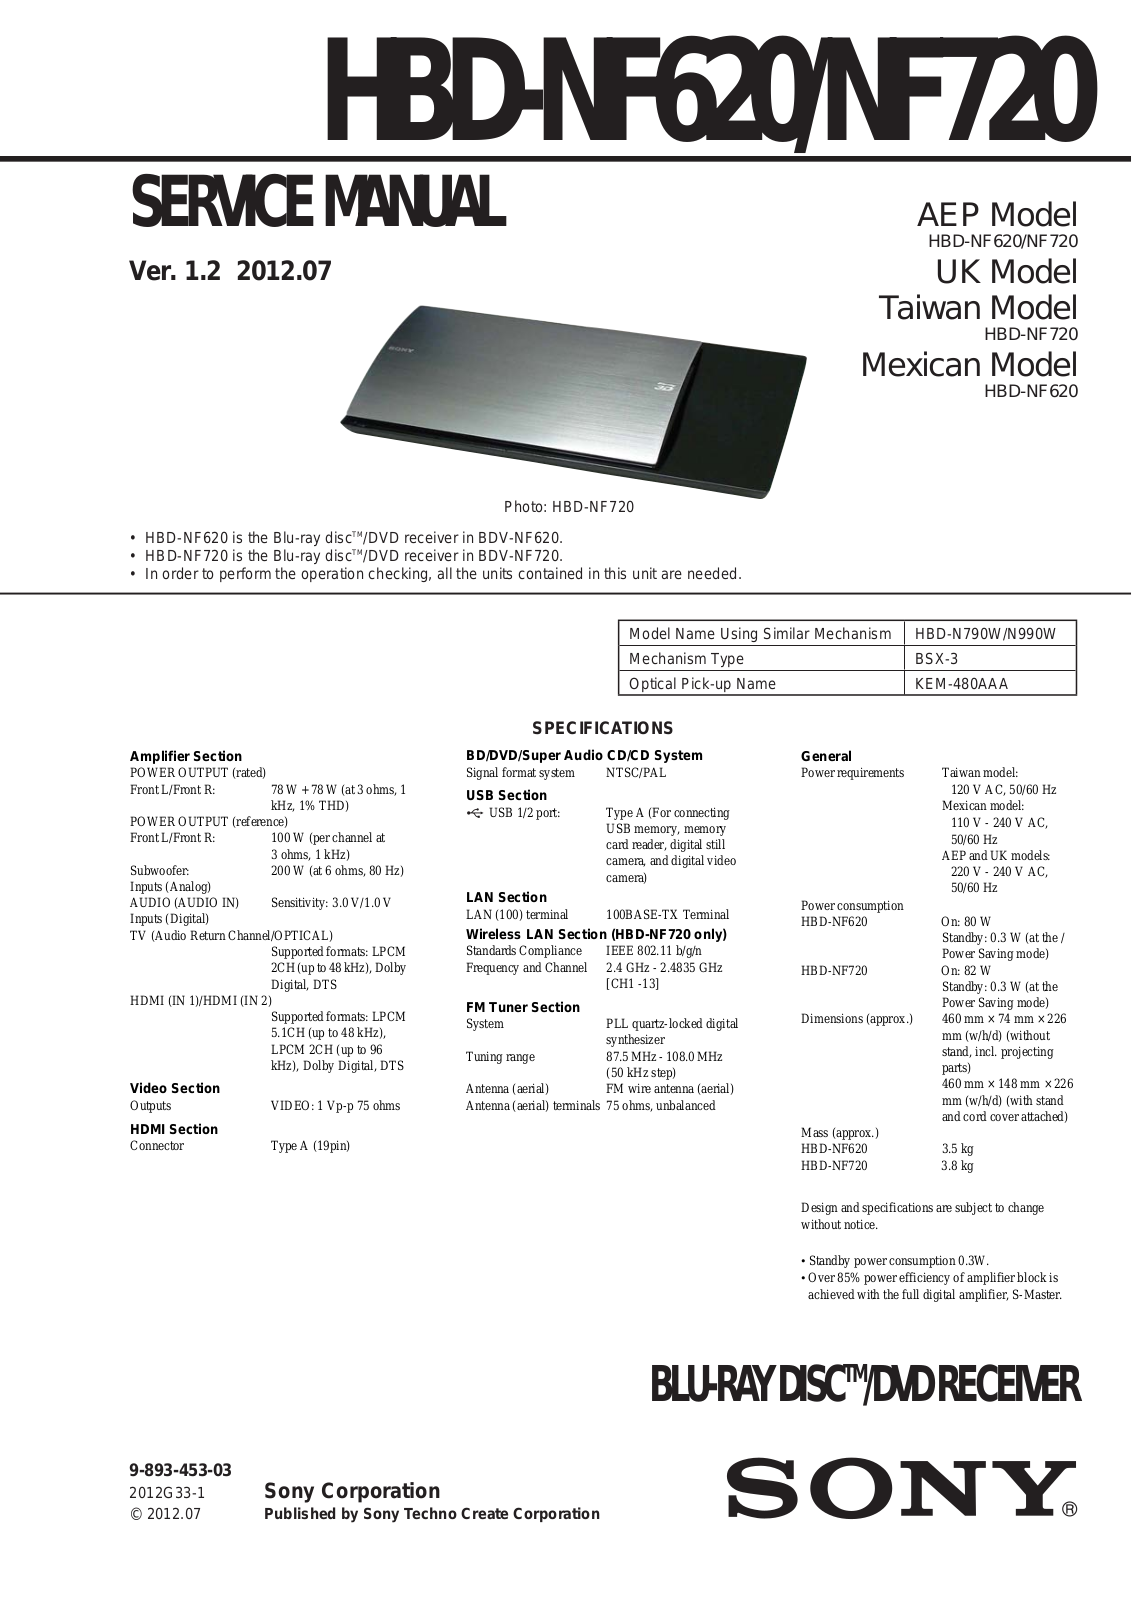 Sony HBD-NF620, HBD-NF720 Service Manual